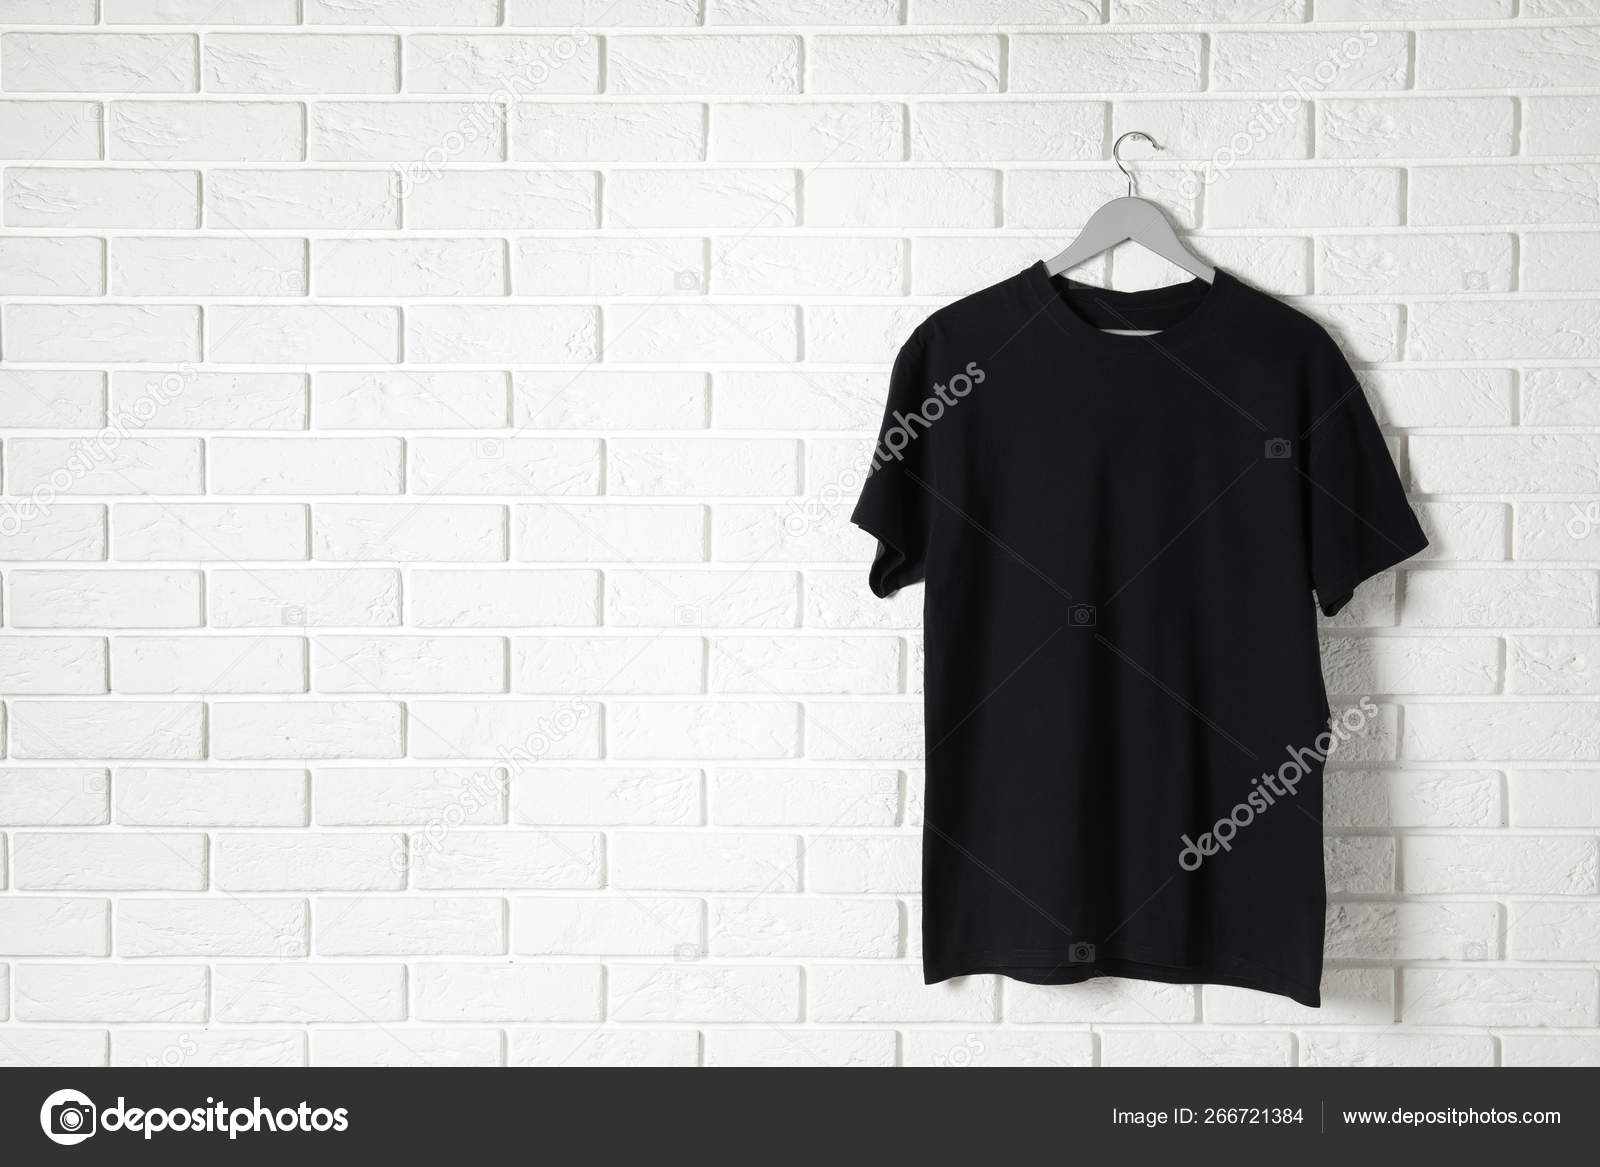 Download Hanger With Black T Shirt Against Brick Wall Mockup For Design Stock Photo Image By C Newafrica 266721384